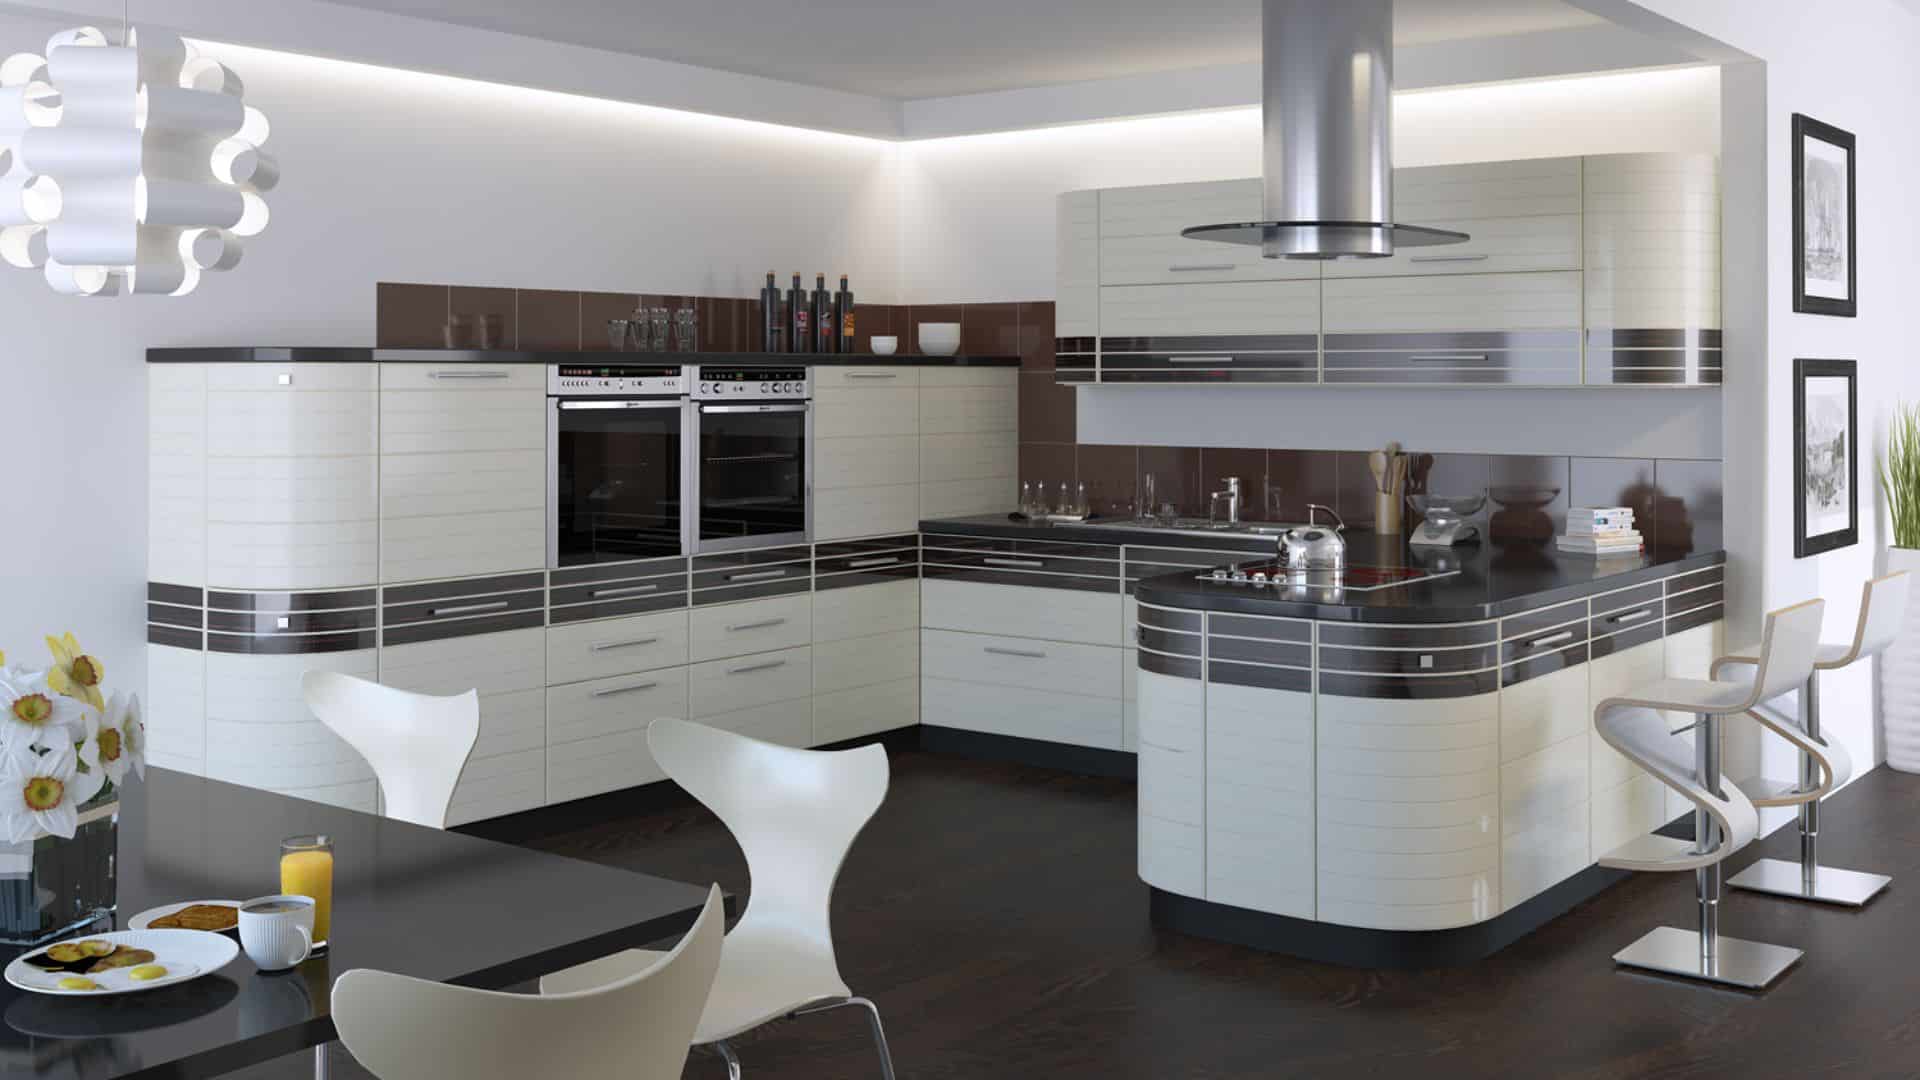 How to Choose Kitchen Furniture That Combines Style